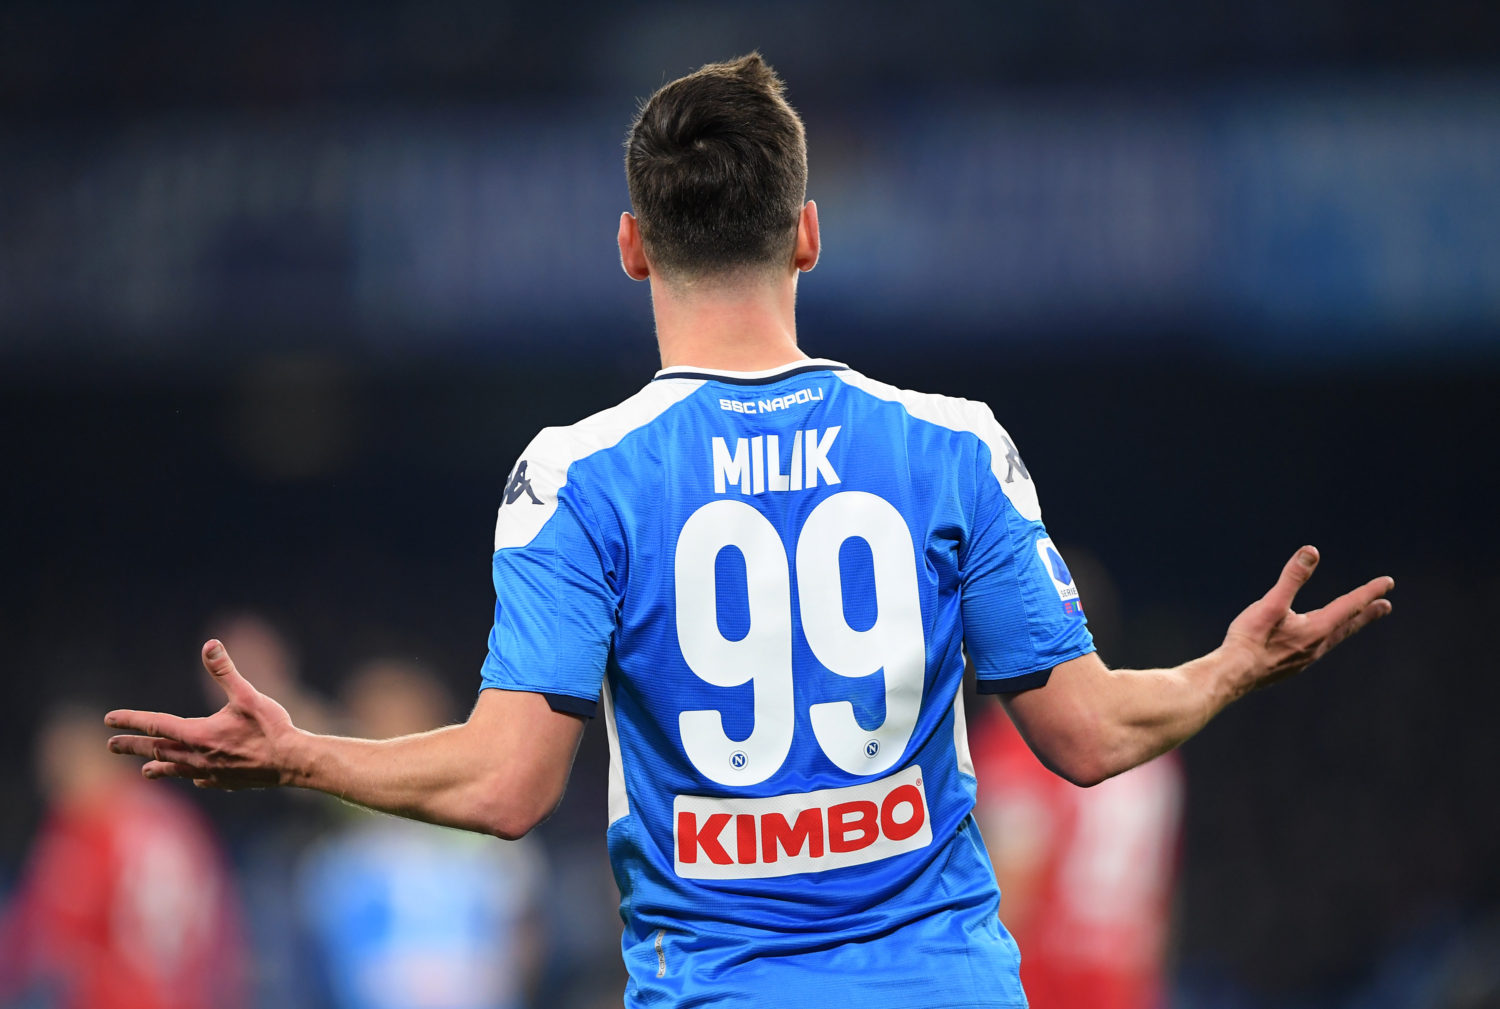 Arkadiusz Milik is nearing a move to Roma after rejecting Premier League interest from Manchester United and Tottenham